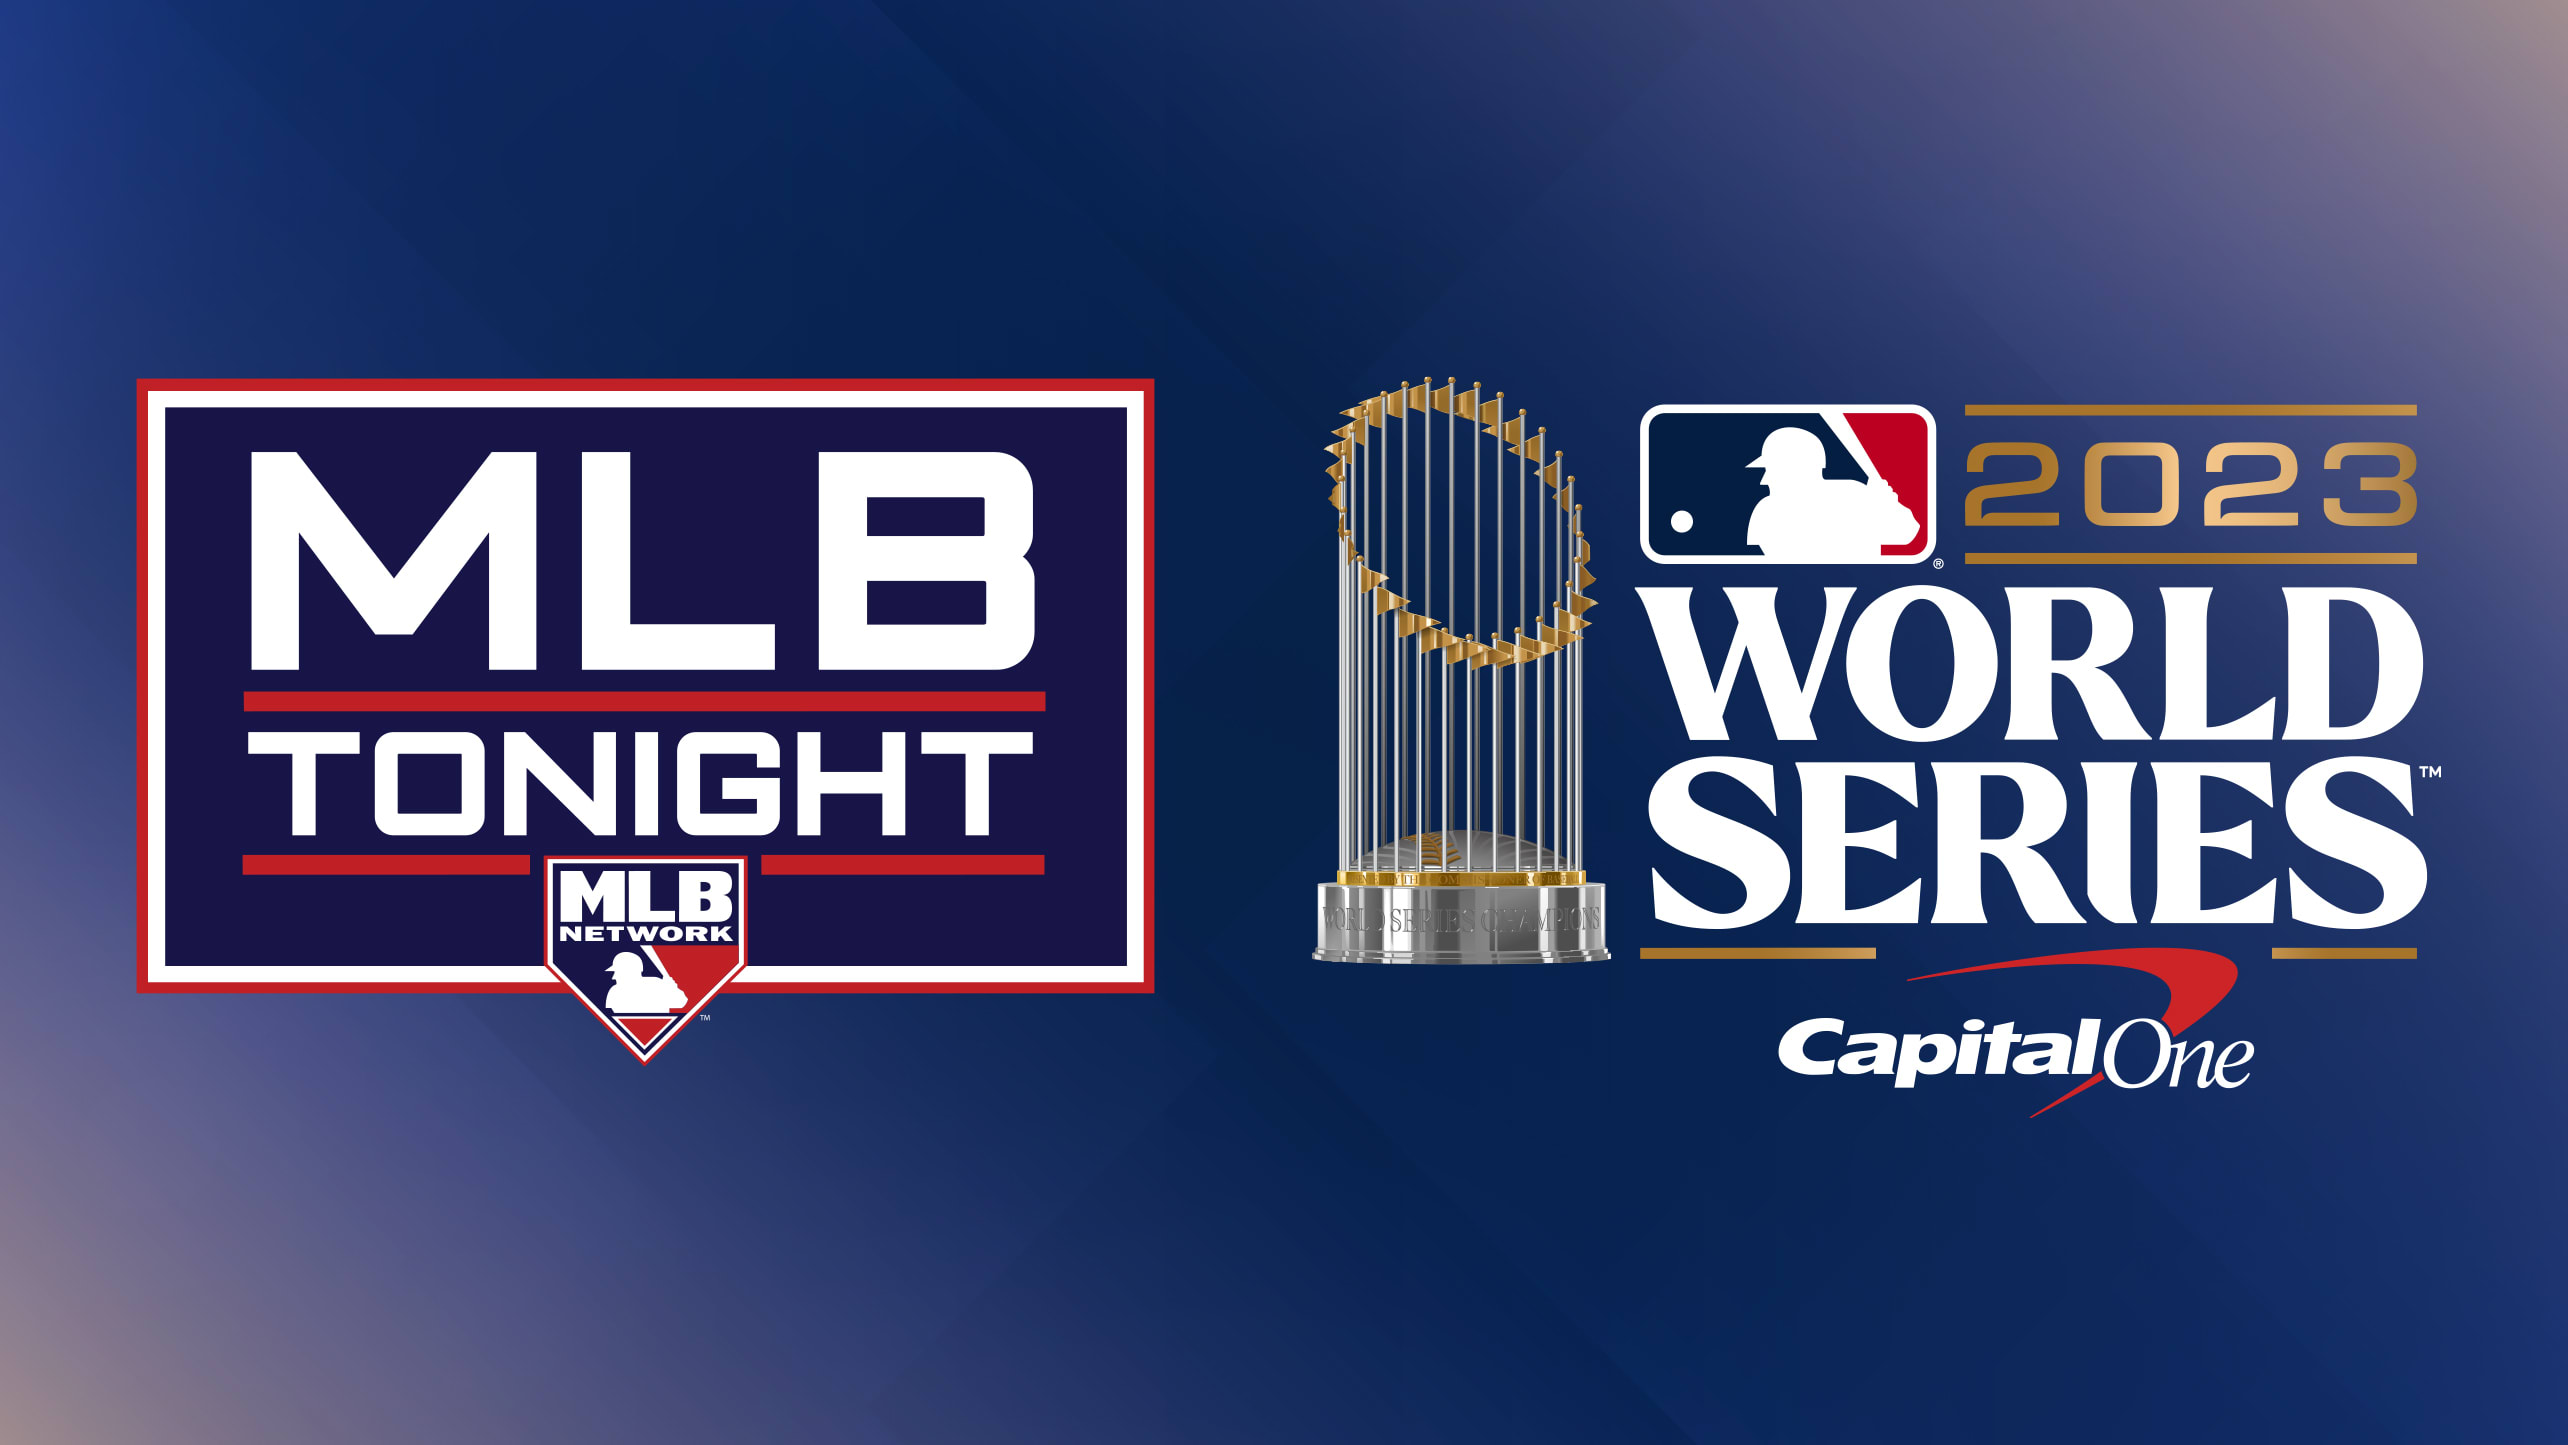 Logos for MLB Tonight and the 2023 World Series